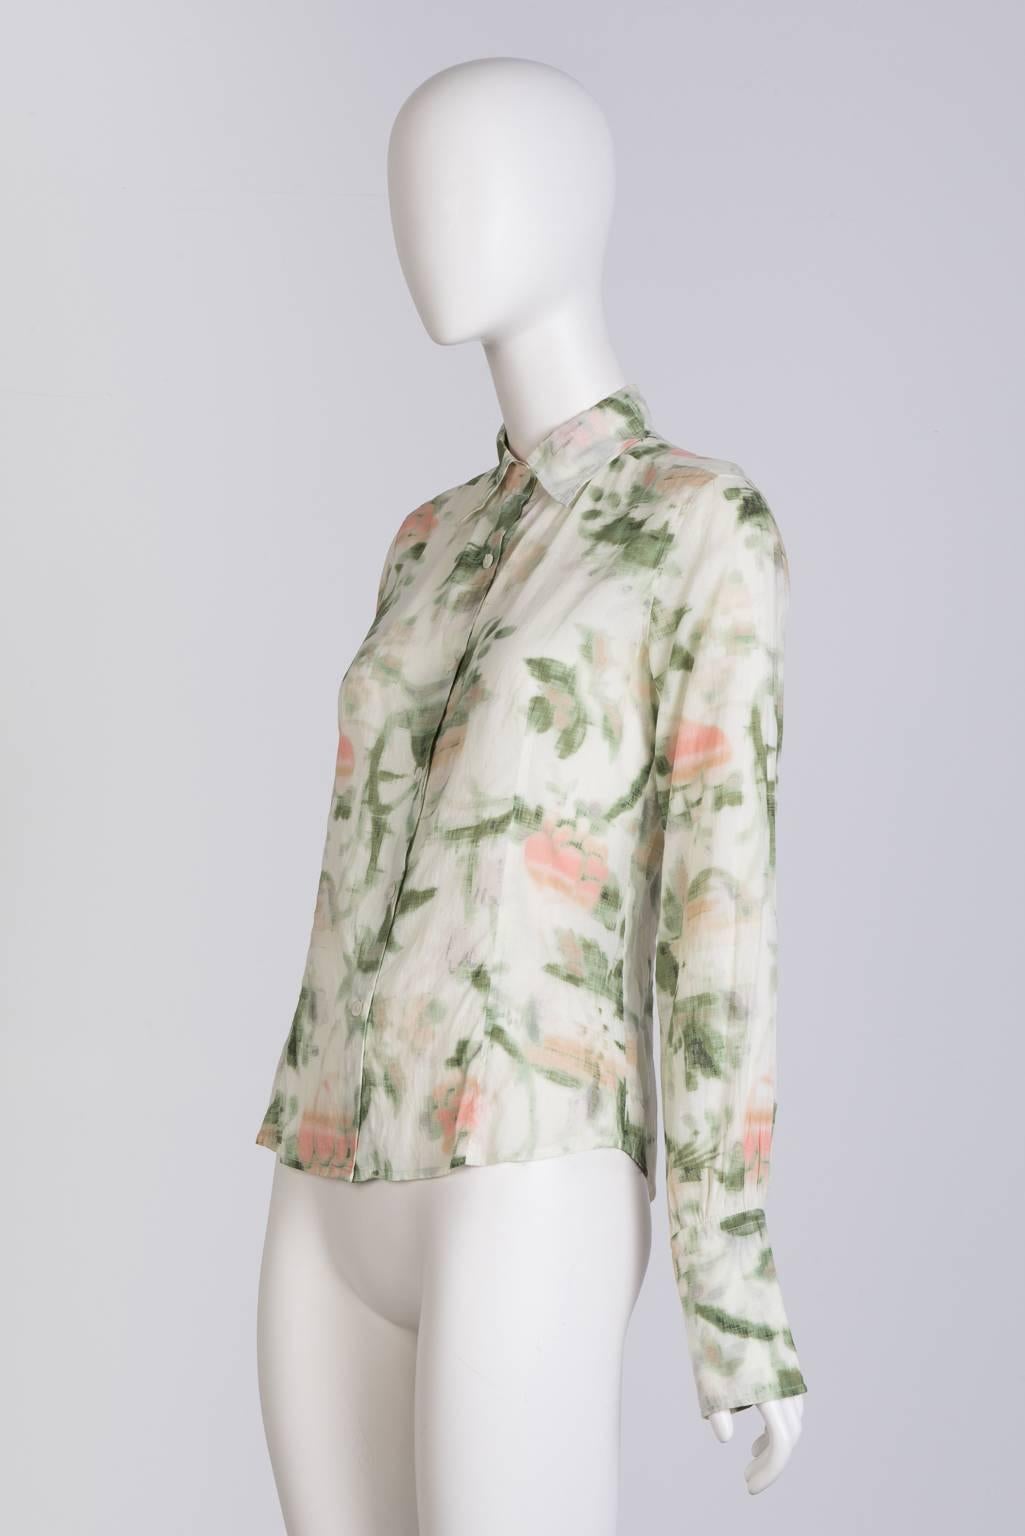 Cotton blouse in watercolour garden print with full sleeve an split cuff.